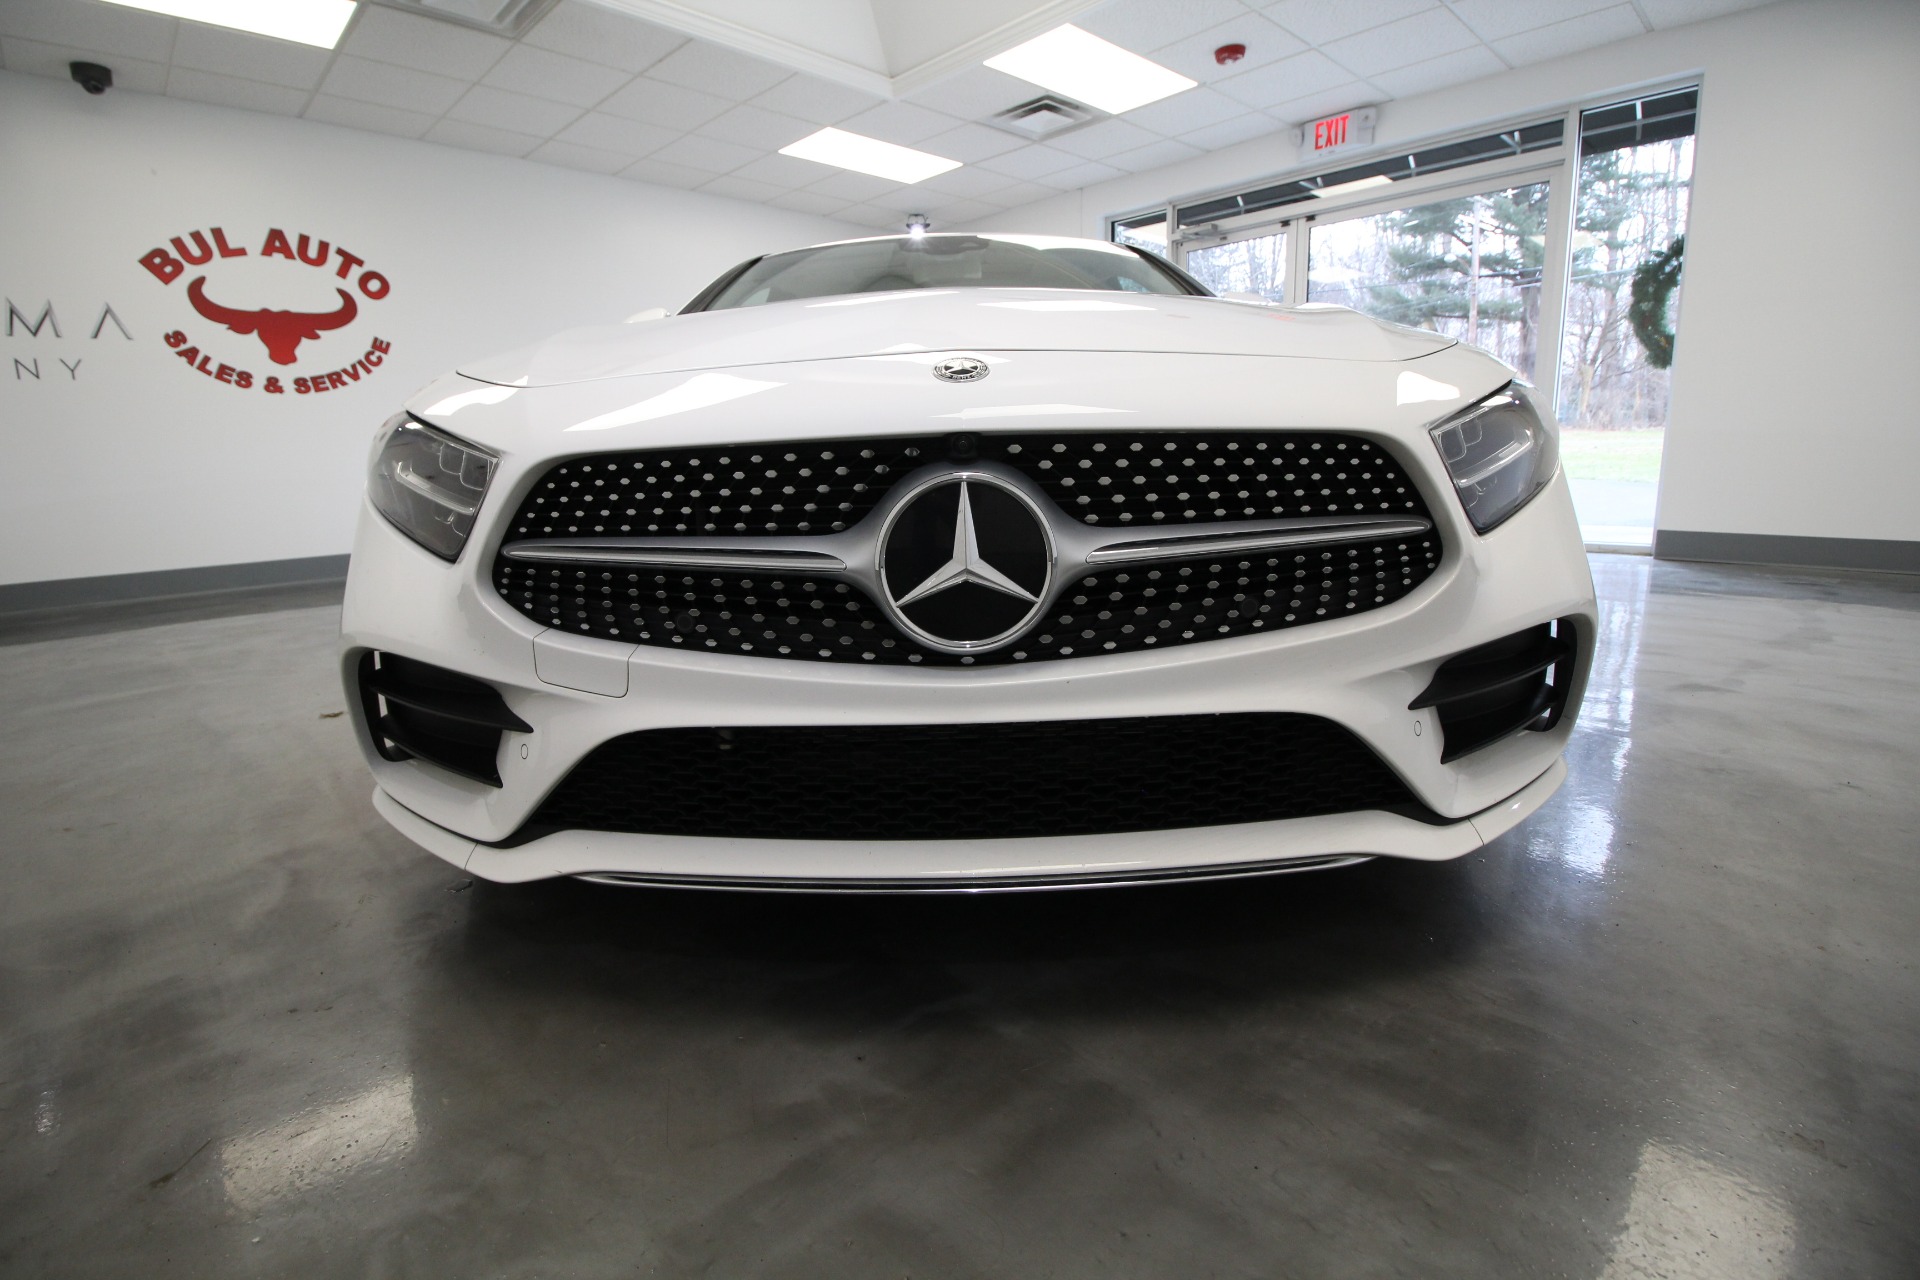 Used 2019 Mercedes-Benz CLS-Class CLS450 4MATIC LIKE NEW 1 OWNER SUPERB | Albany, NY